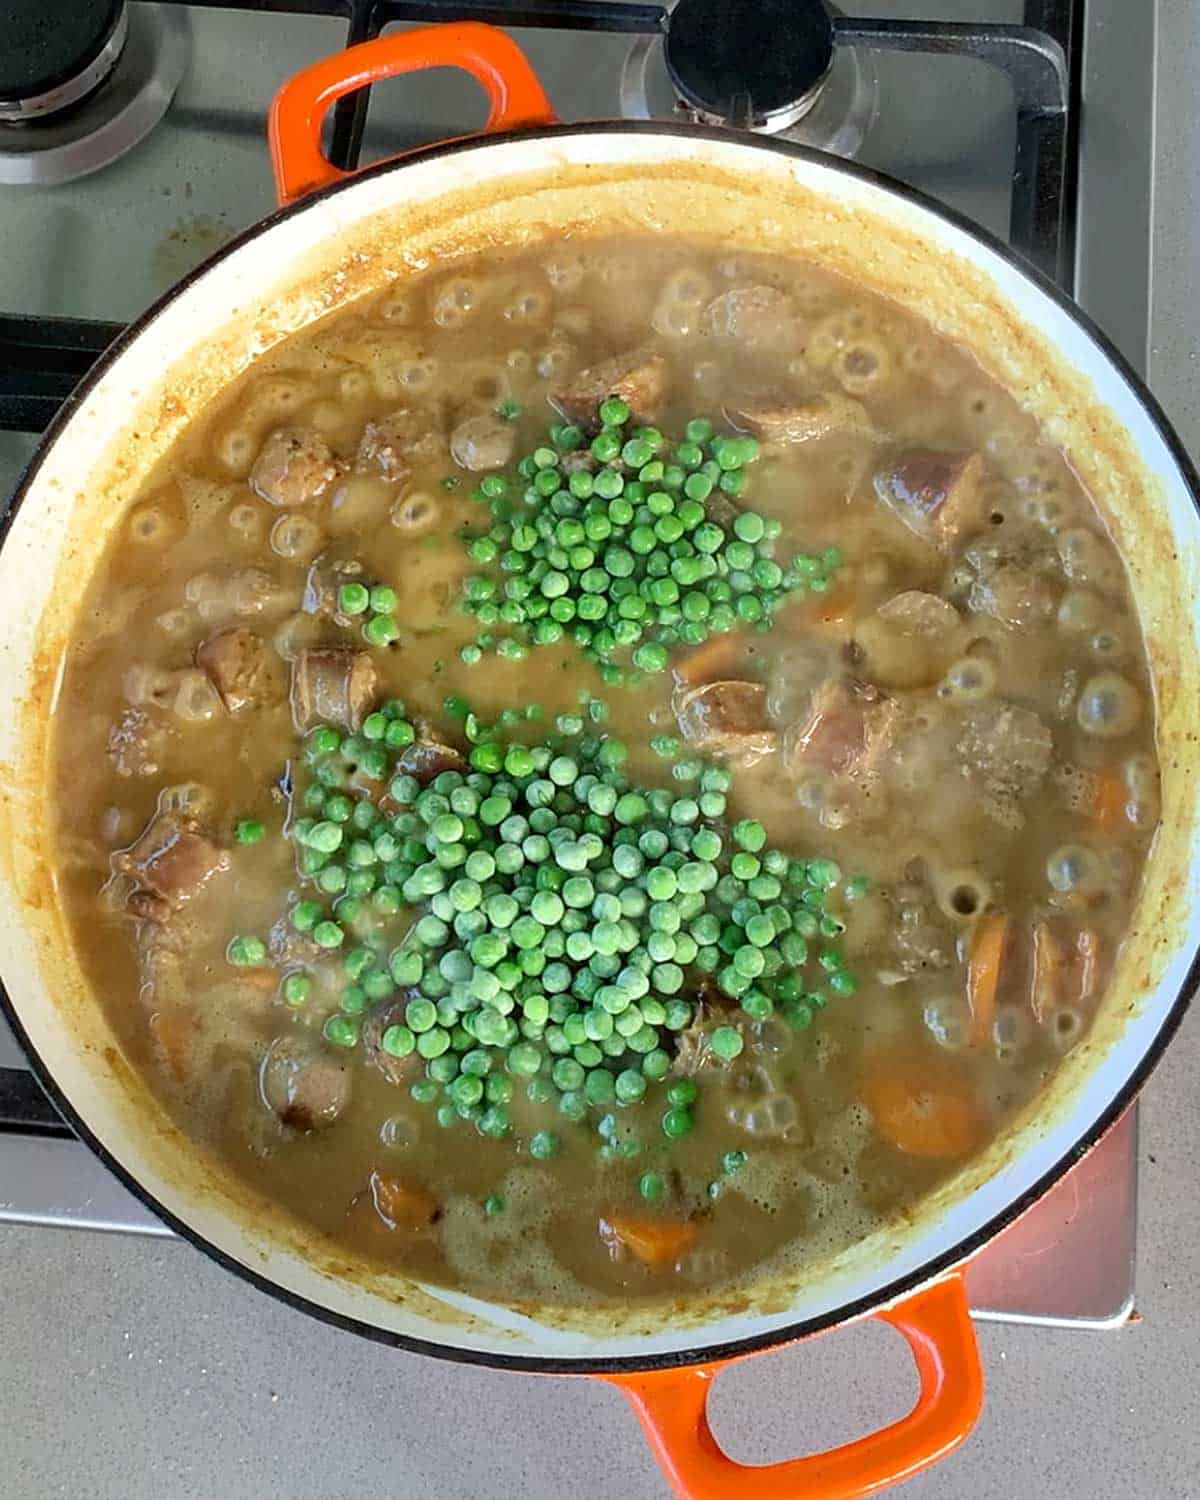 Curried sausages and peas cooking in a casserole dish.